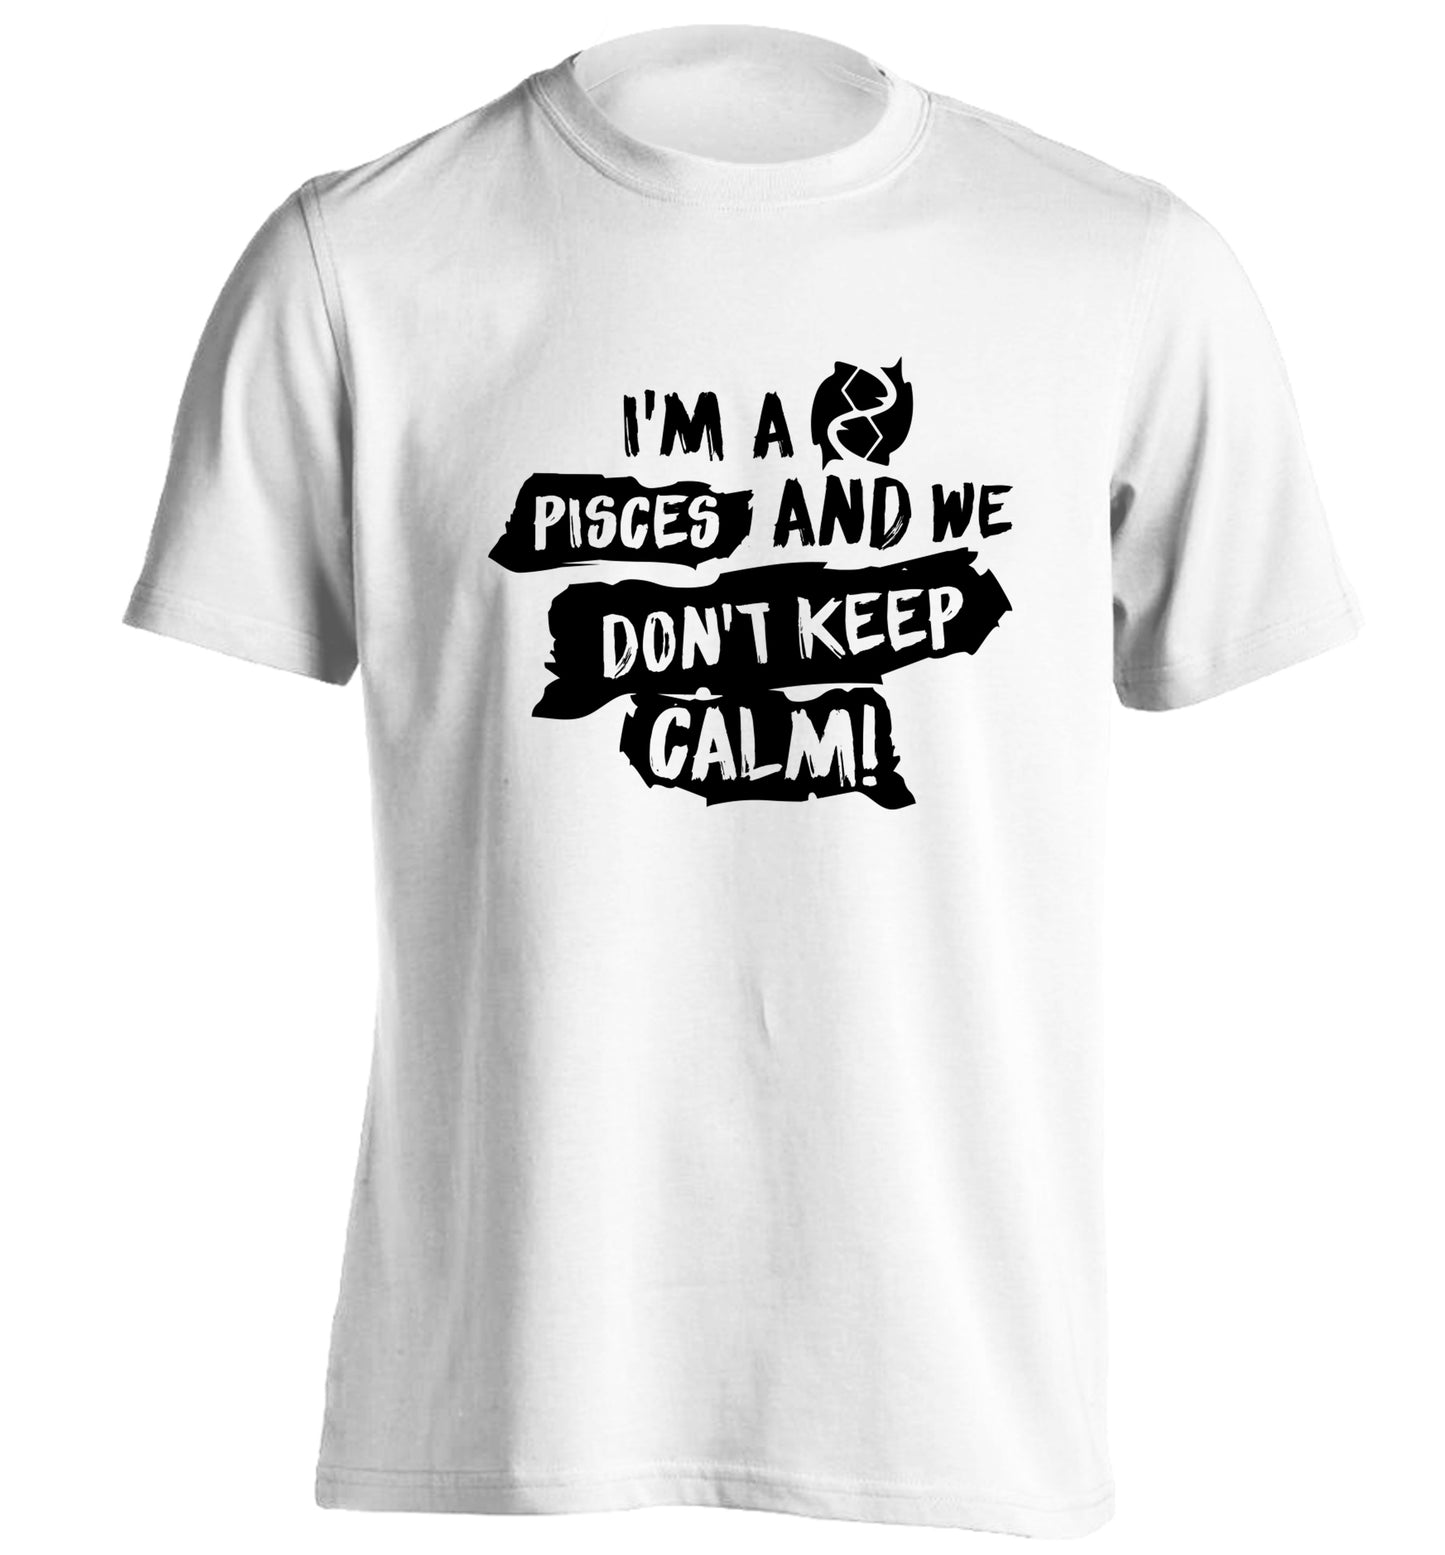 I'm a pisces and we don't keep calm adults unisex white Tshirt 2XL